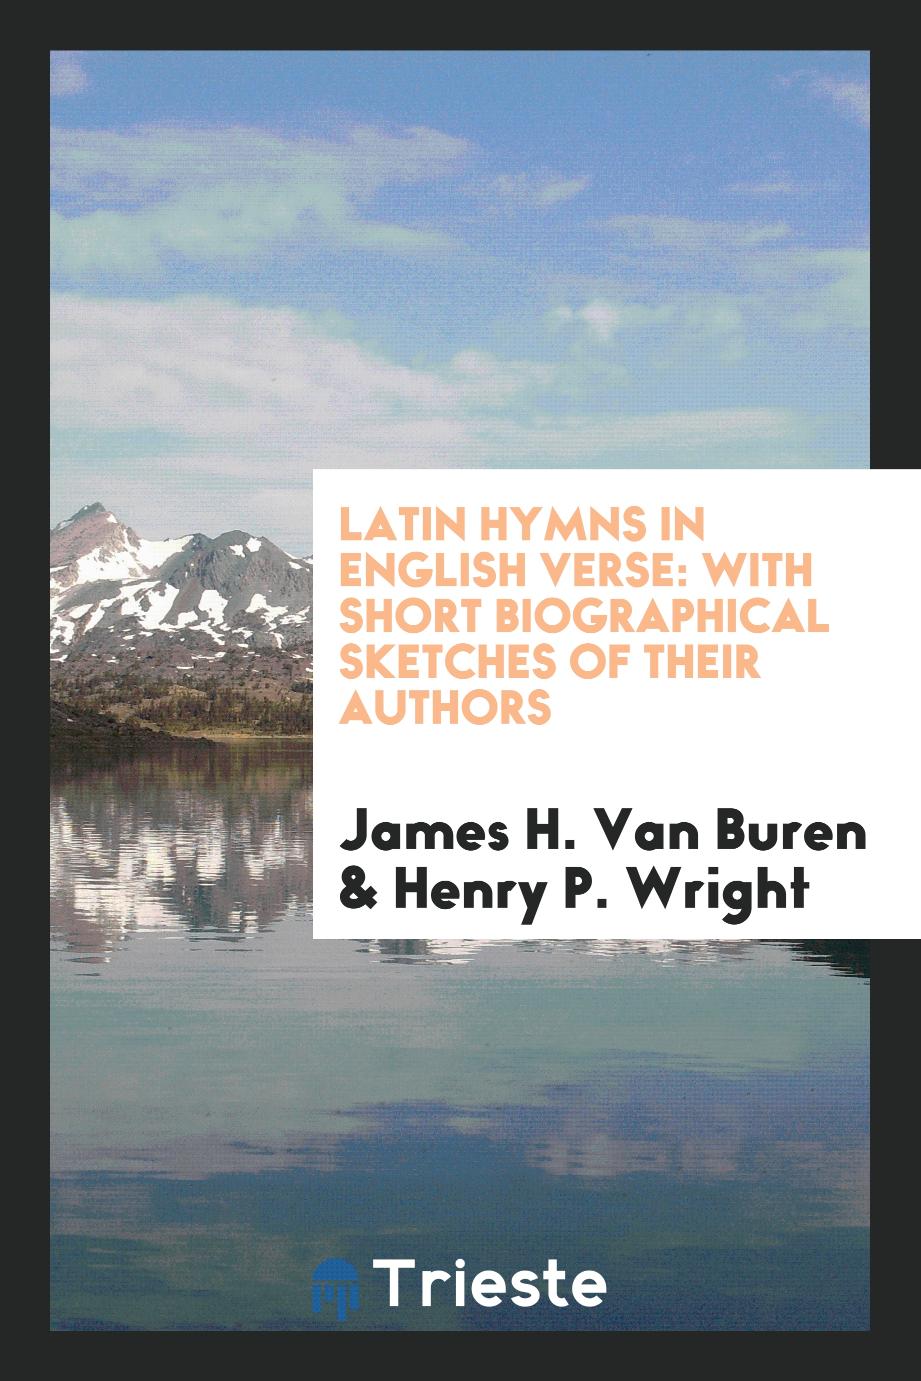 Latin Hymns in English Verse: With Short Biographical Sketches of Their Authors